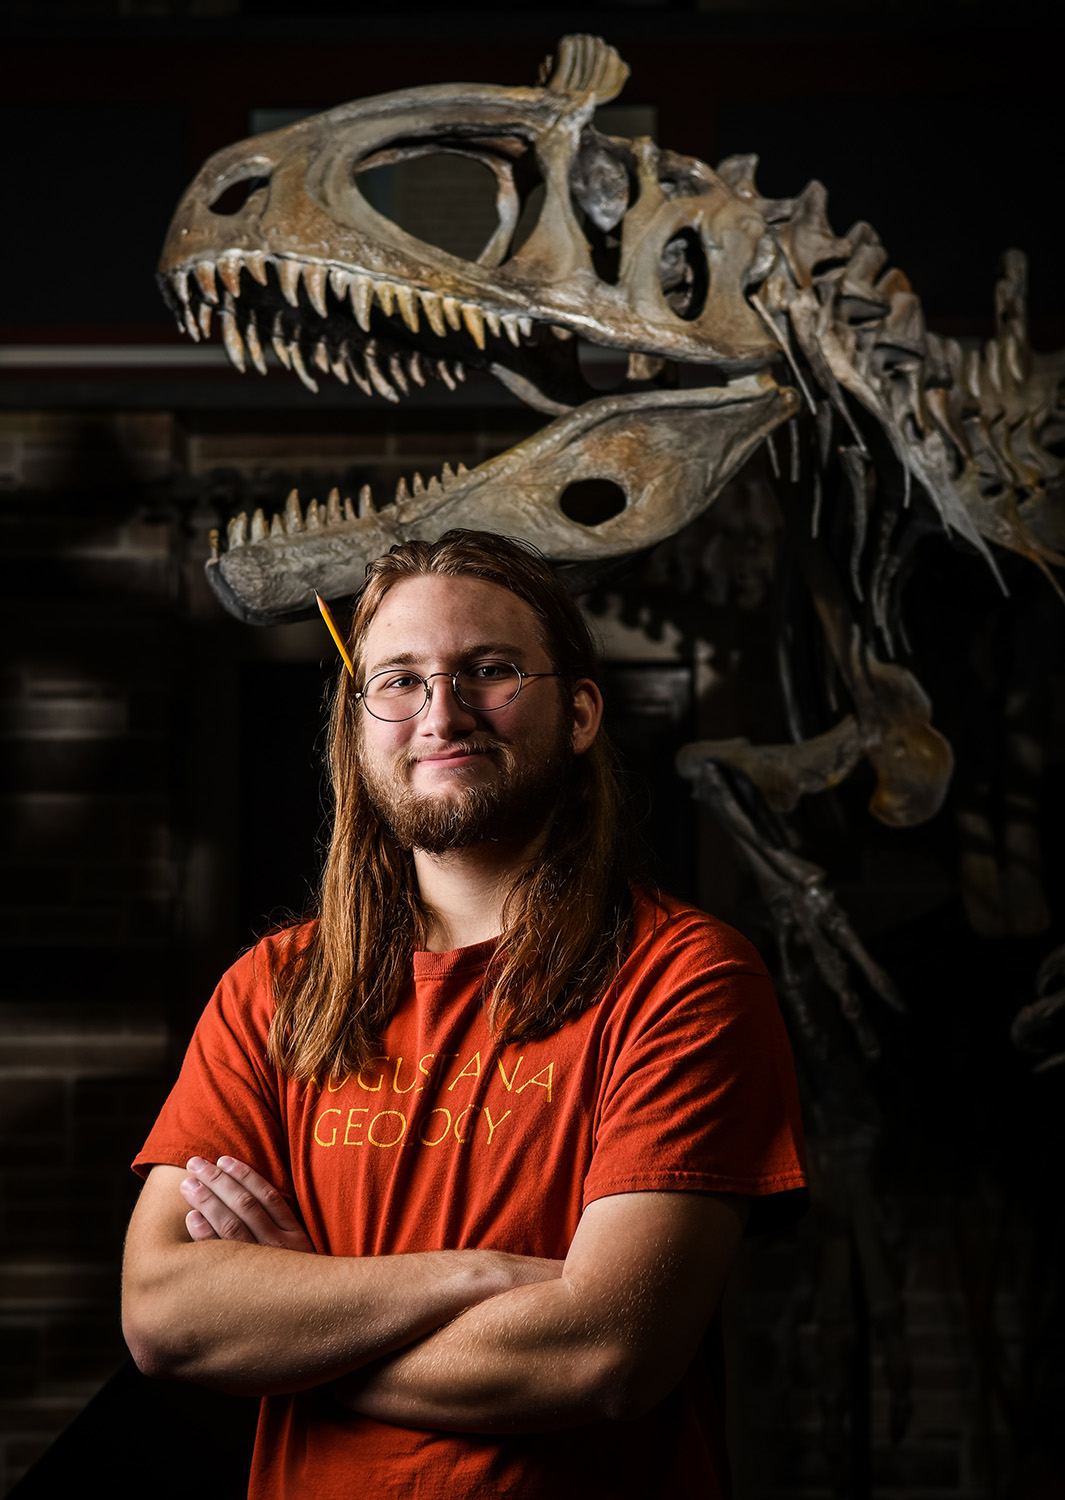 Augustana College student Quinton Powers poses for a portrait in the college's Fryxell Geology Museum. The Eagle Scout, from Homer, Ill., discovered a new stegosaurus bone during a paleontology dig about 100 miles from Billings during his summer internship at the Judith River Dinosaur Institute in Montana. 